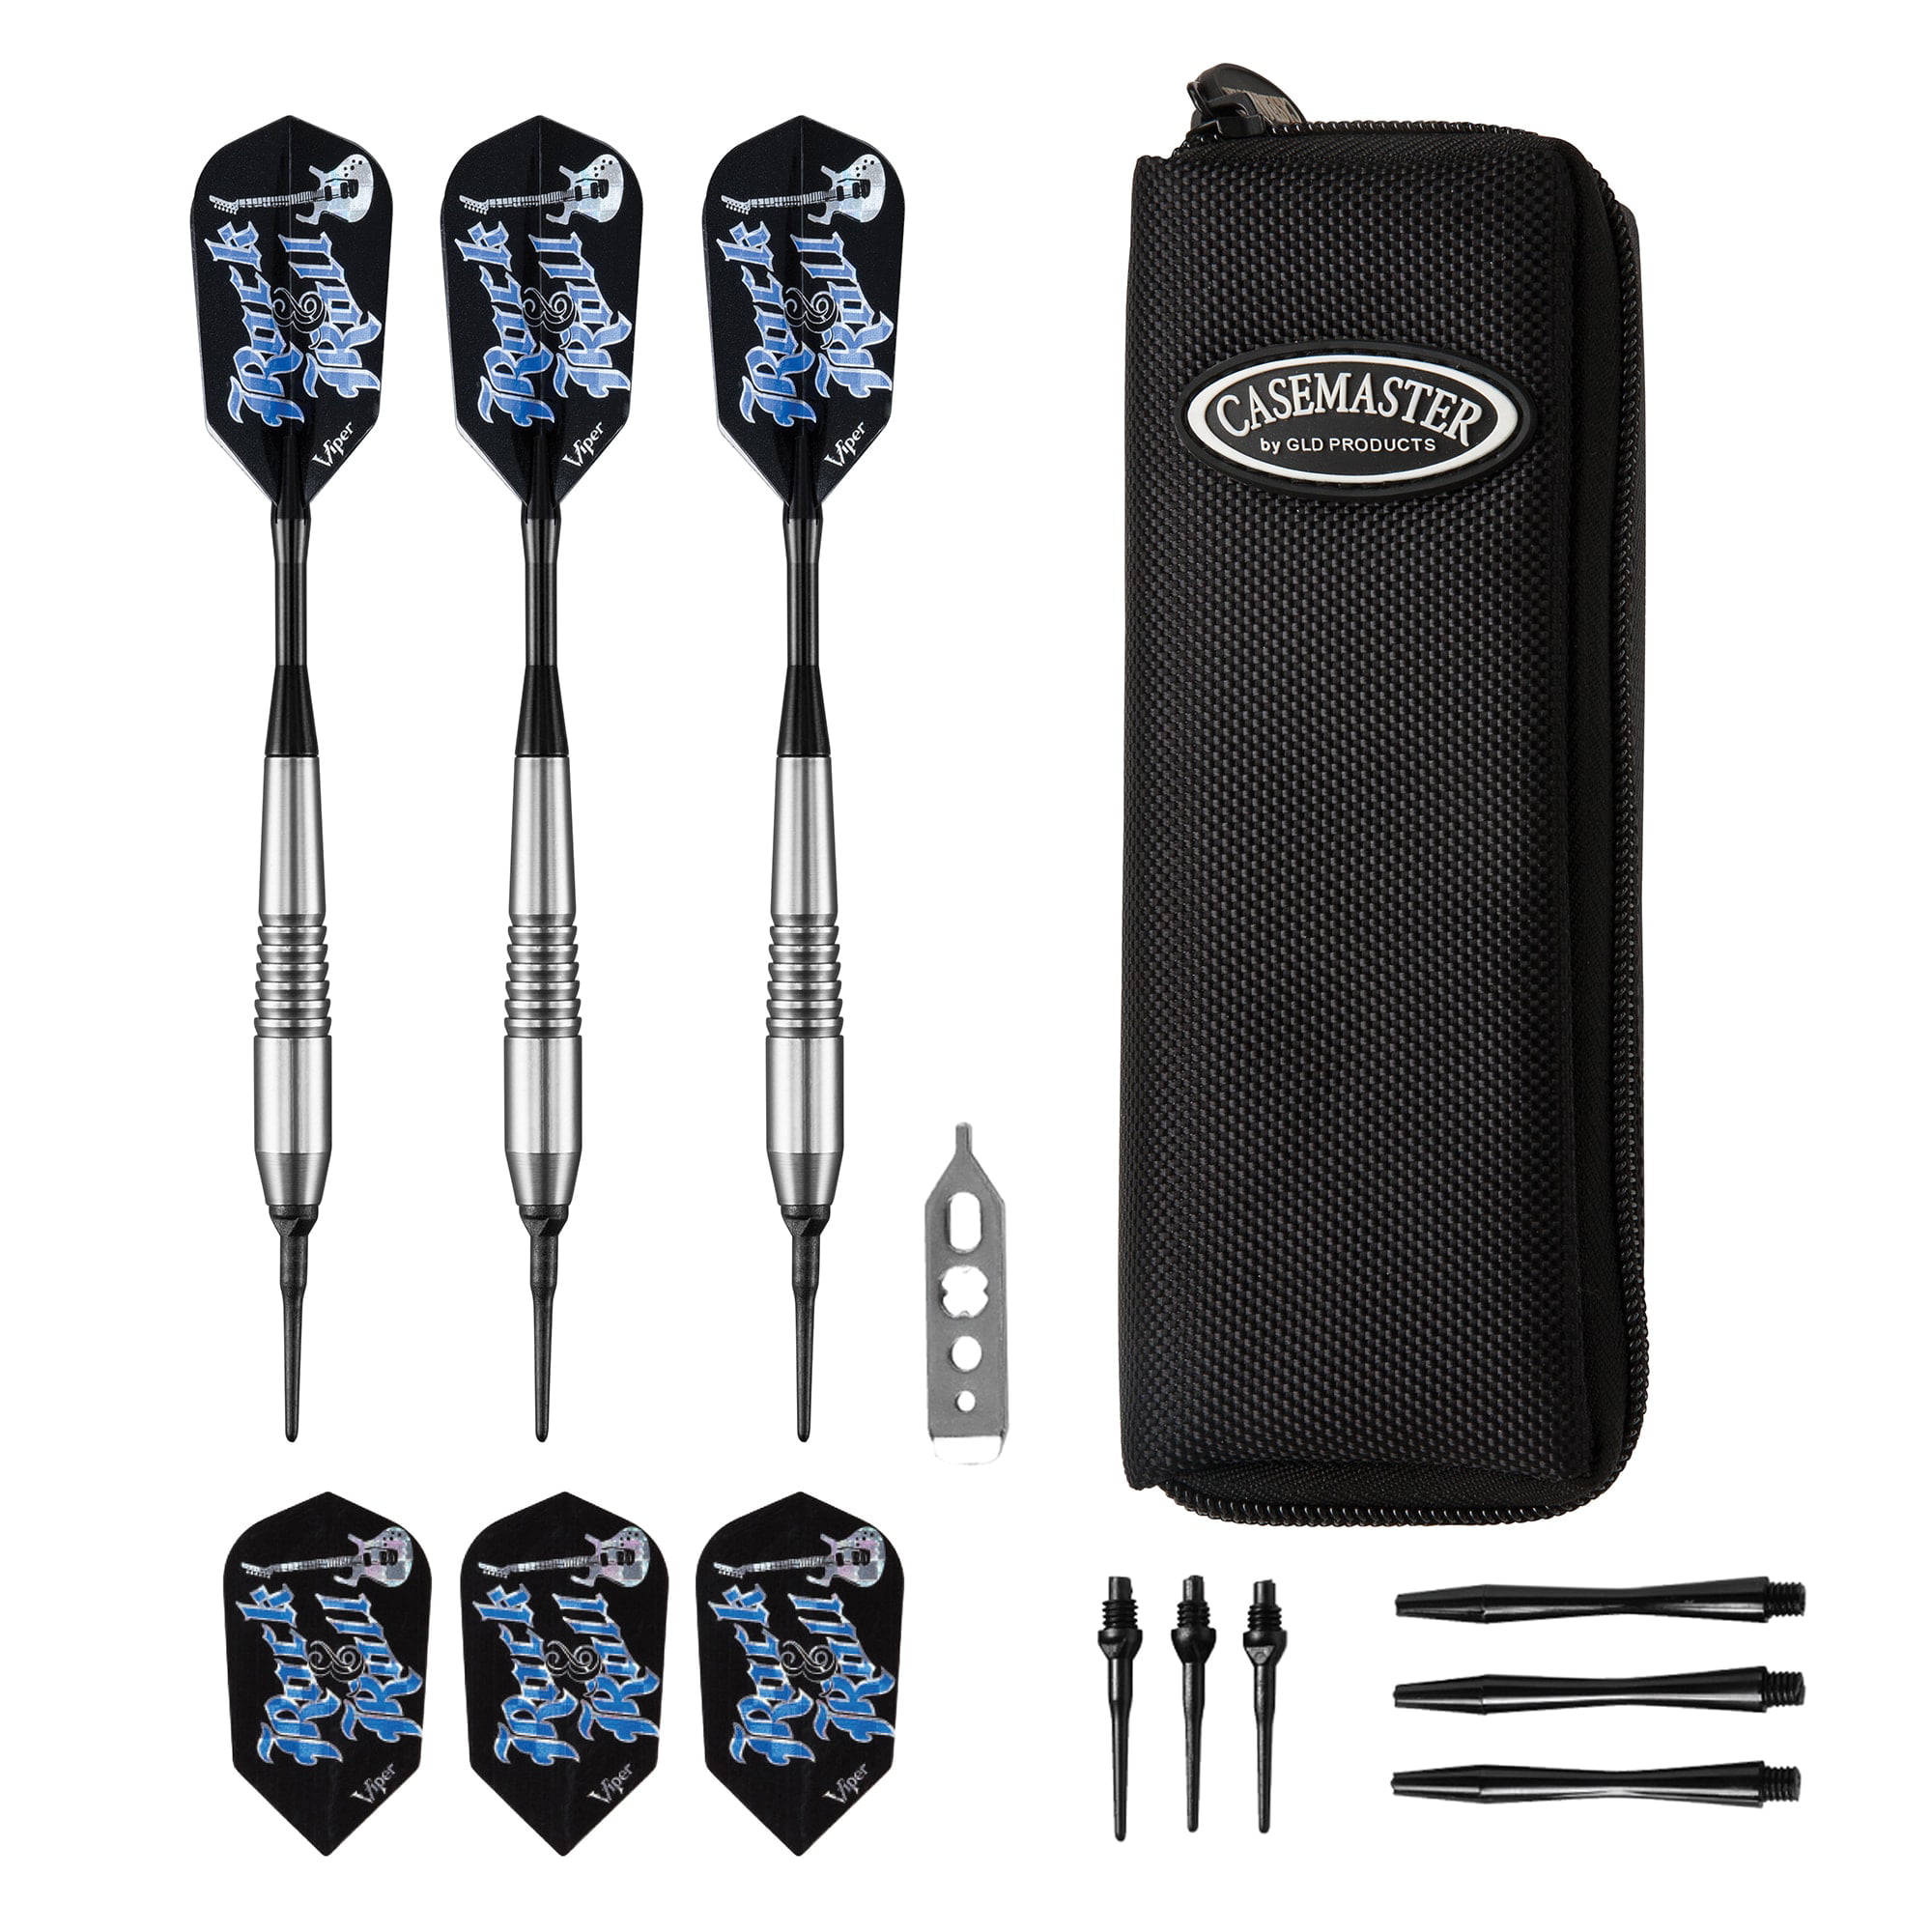 Viper Echo Limited Edition Black 20gm Soft Tip Darts D-45 w// FREE Shipping /&Case